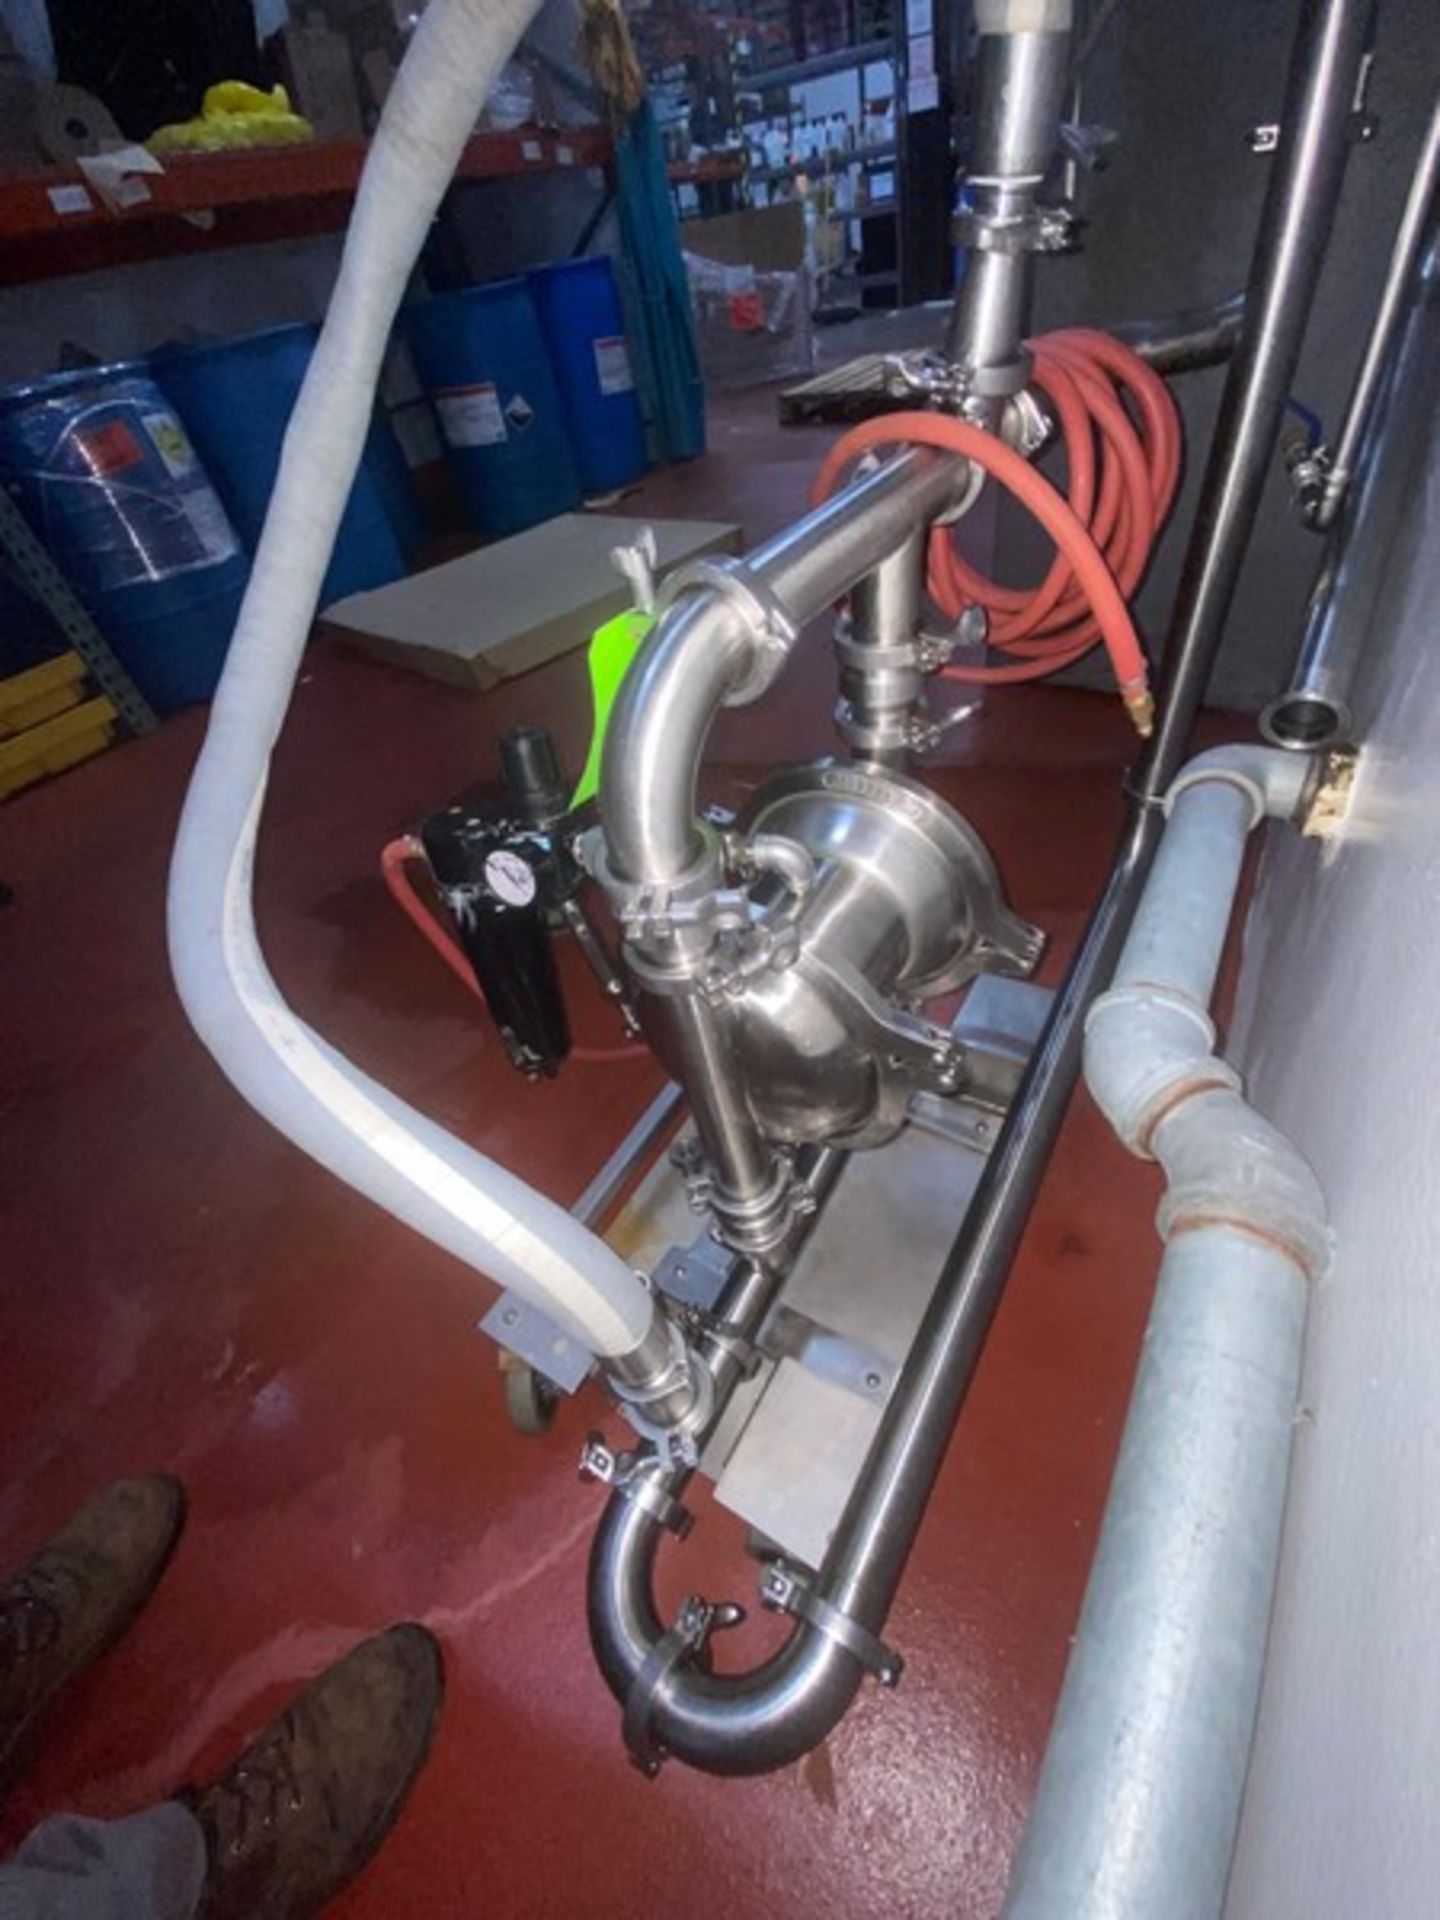 MURZAN S/S Diaphragm Pump, M/N PI-50-SL-SC-IM2-2Mx2M, with Transfer Hose, Mounted on S/S Portable - Image 5 of 7